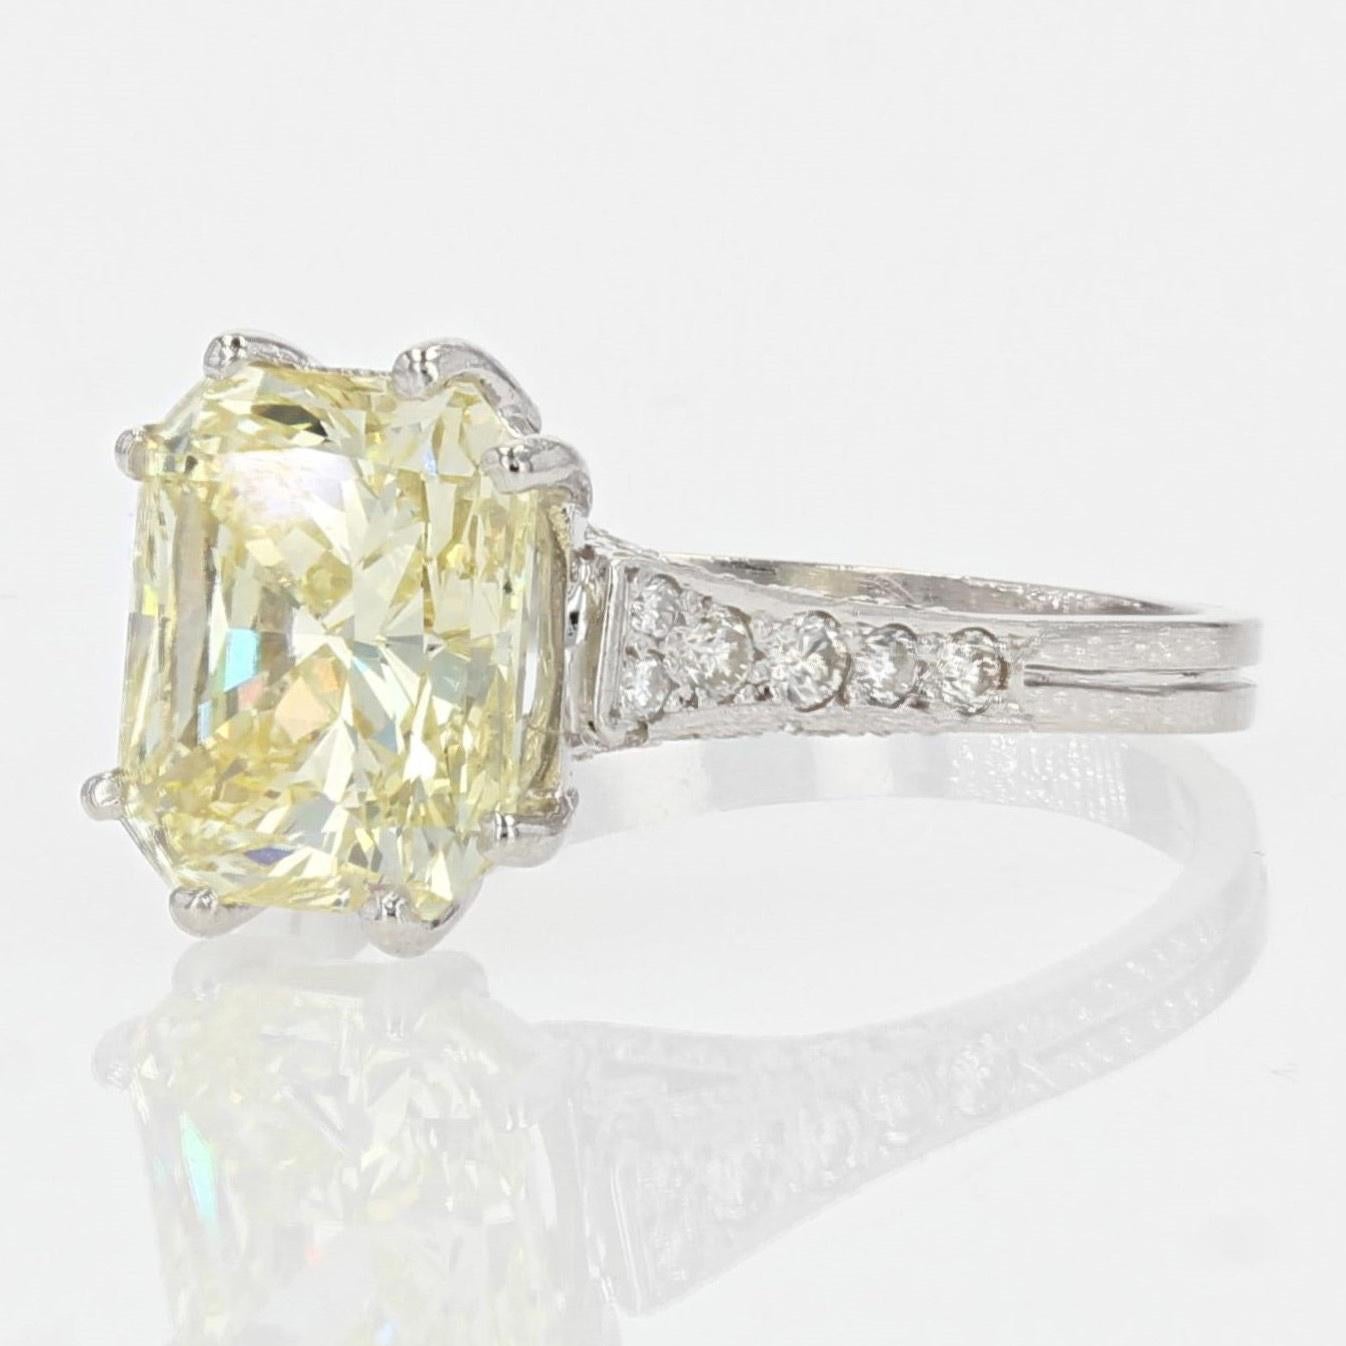 French 3.65 Carat Fancy Yellow Emerald Cut Diamond Platinum Ring For Sale 2